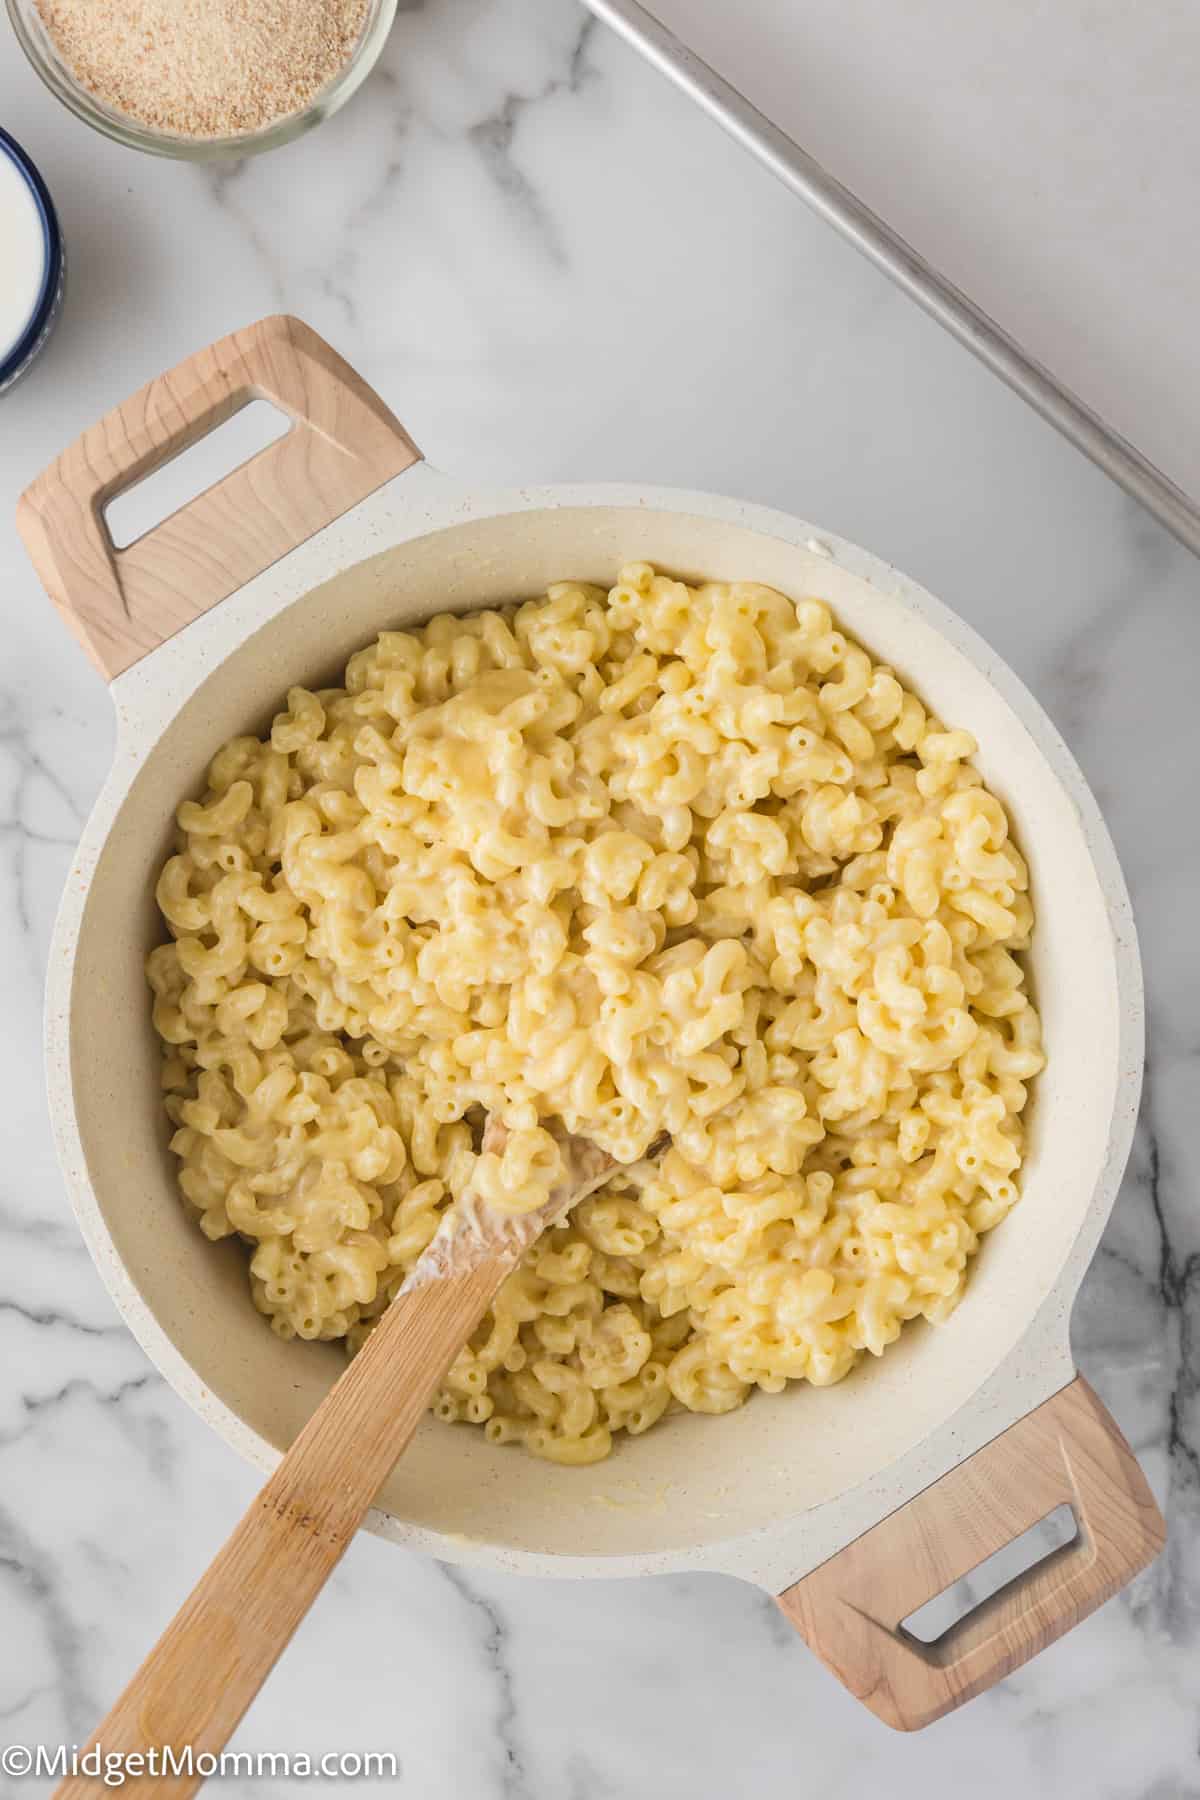 A pot of creamy macaroni and cheese on a kitchen counter, with a wooden spoon.